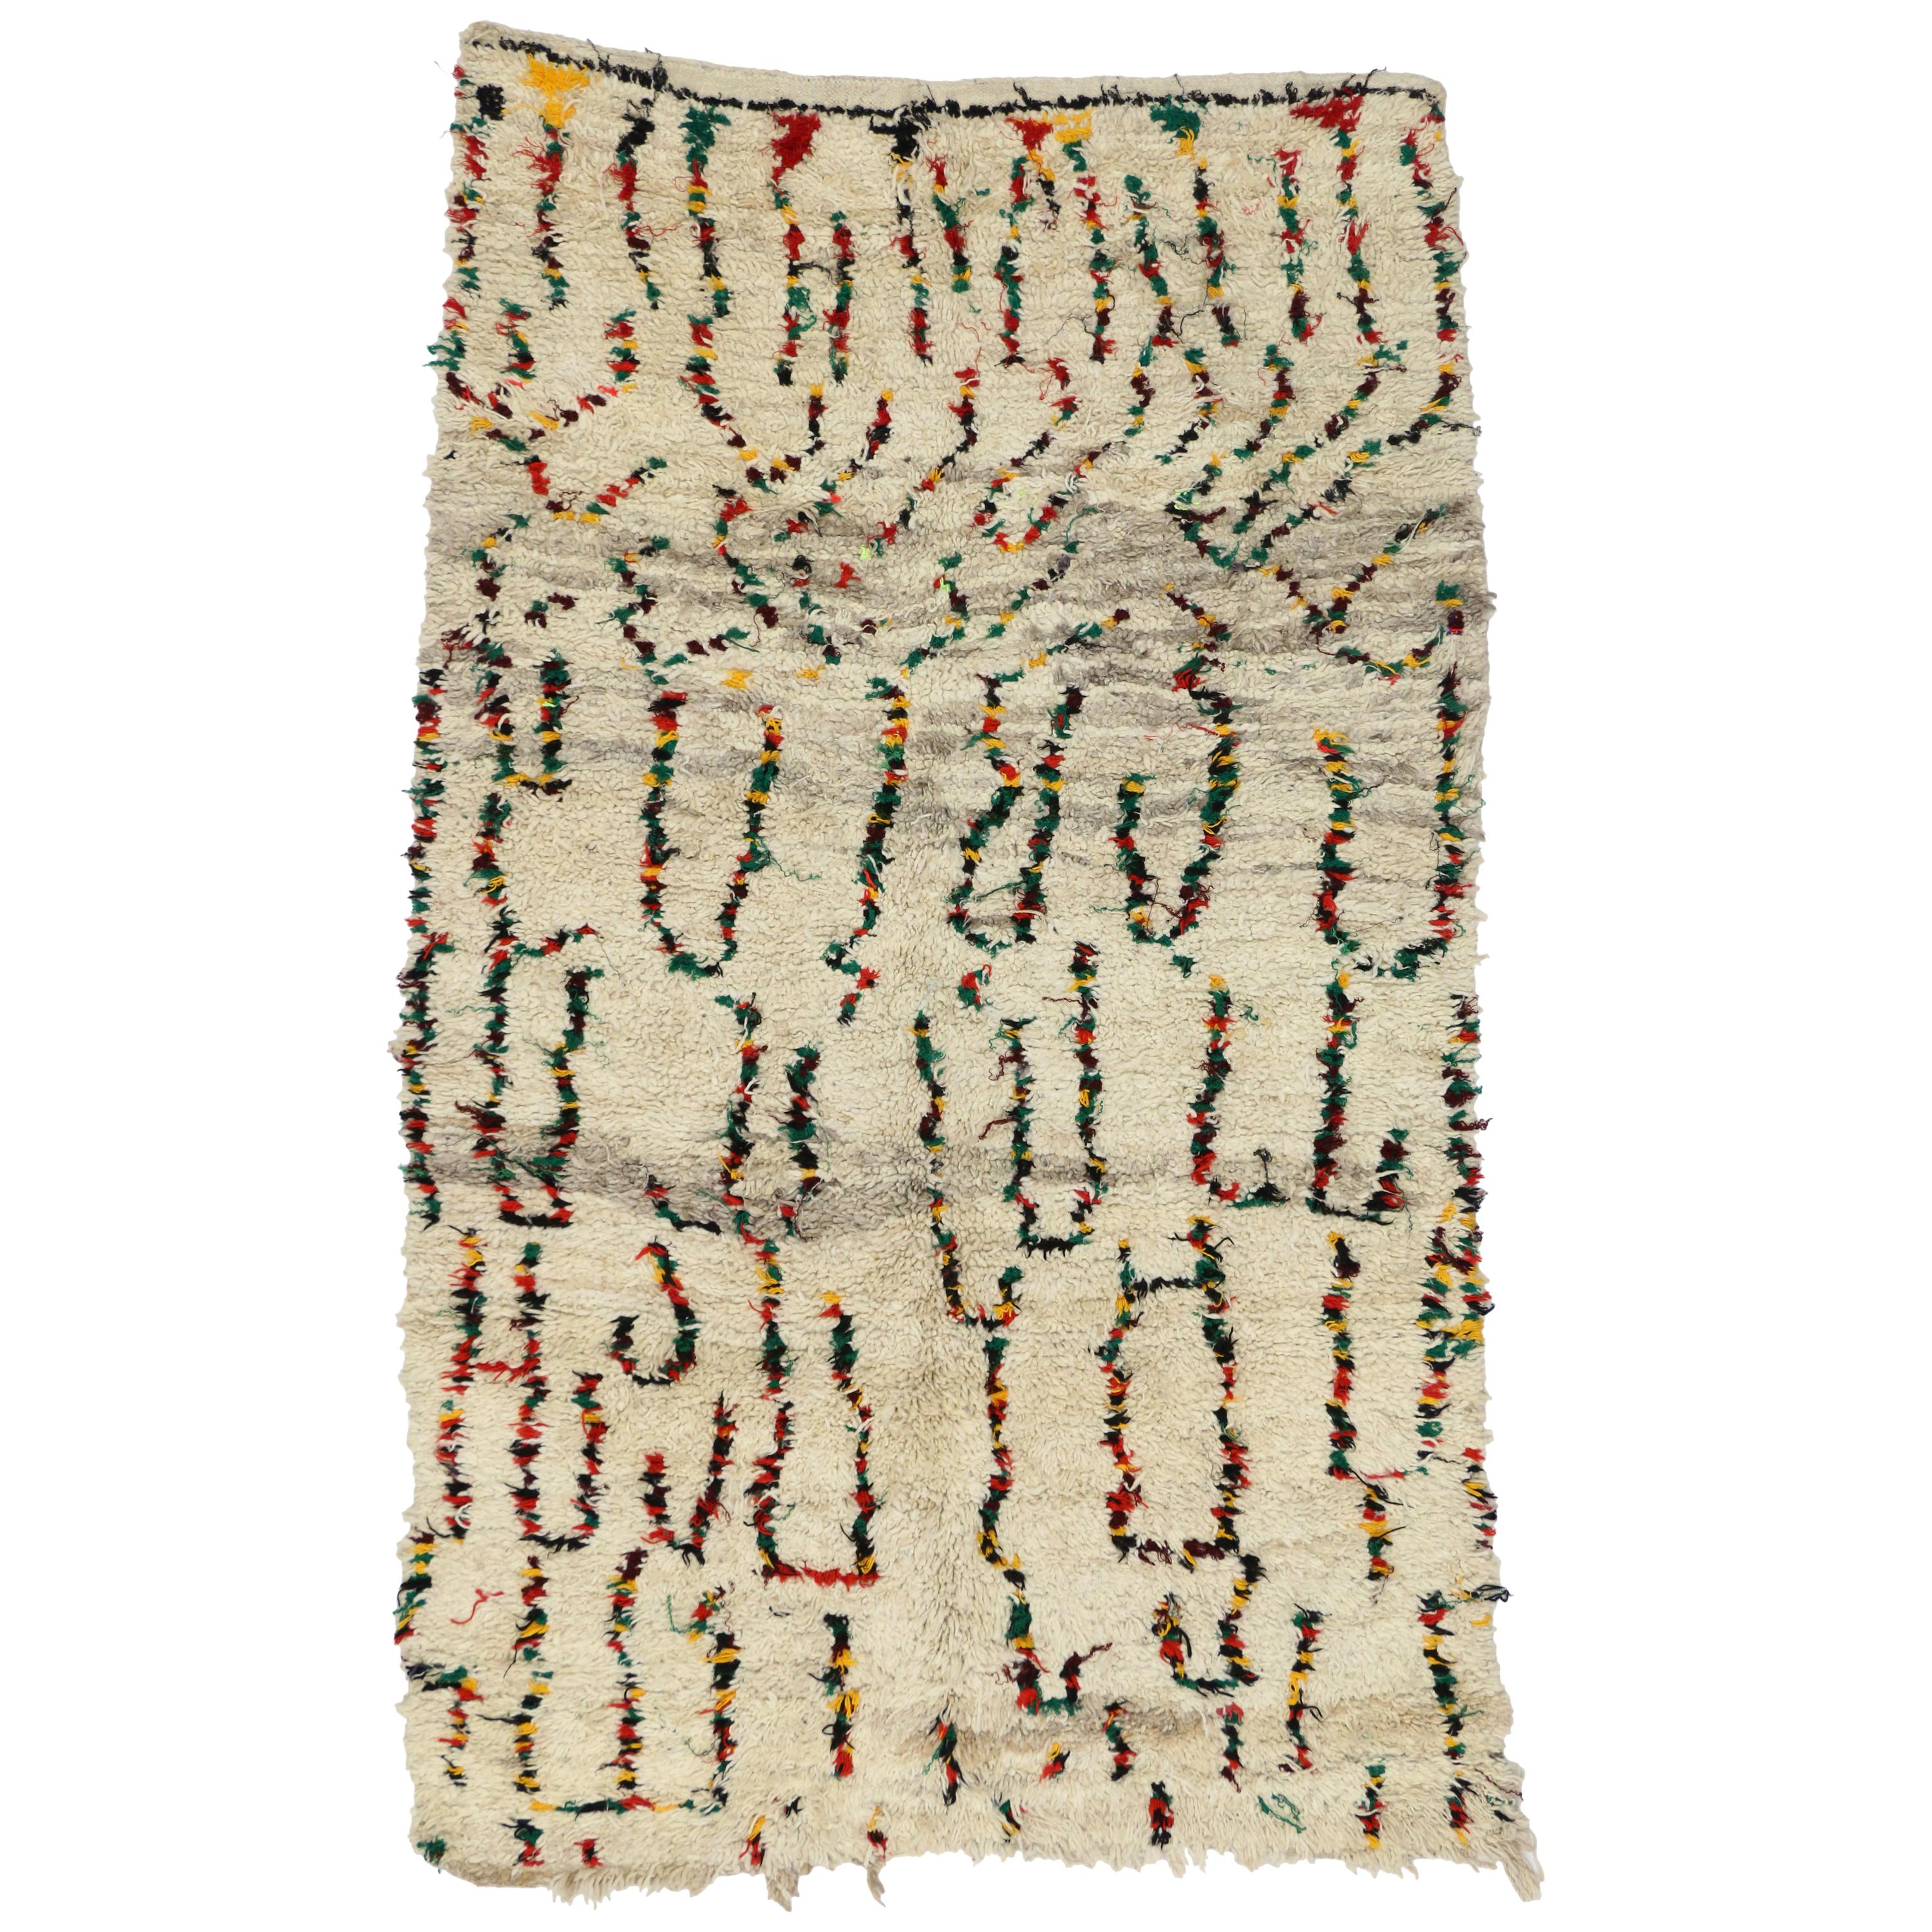 Vintage Berber Moroccan Azilal Rug with Tribal Vibes and Abstract Line Art Style